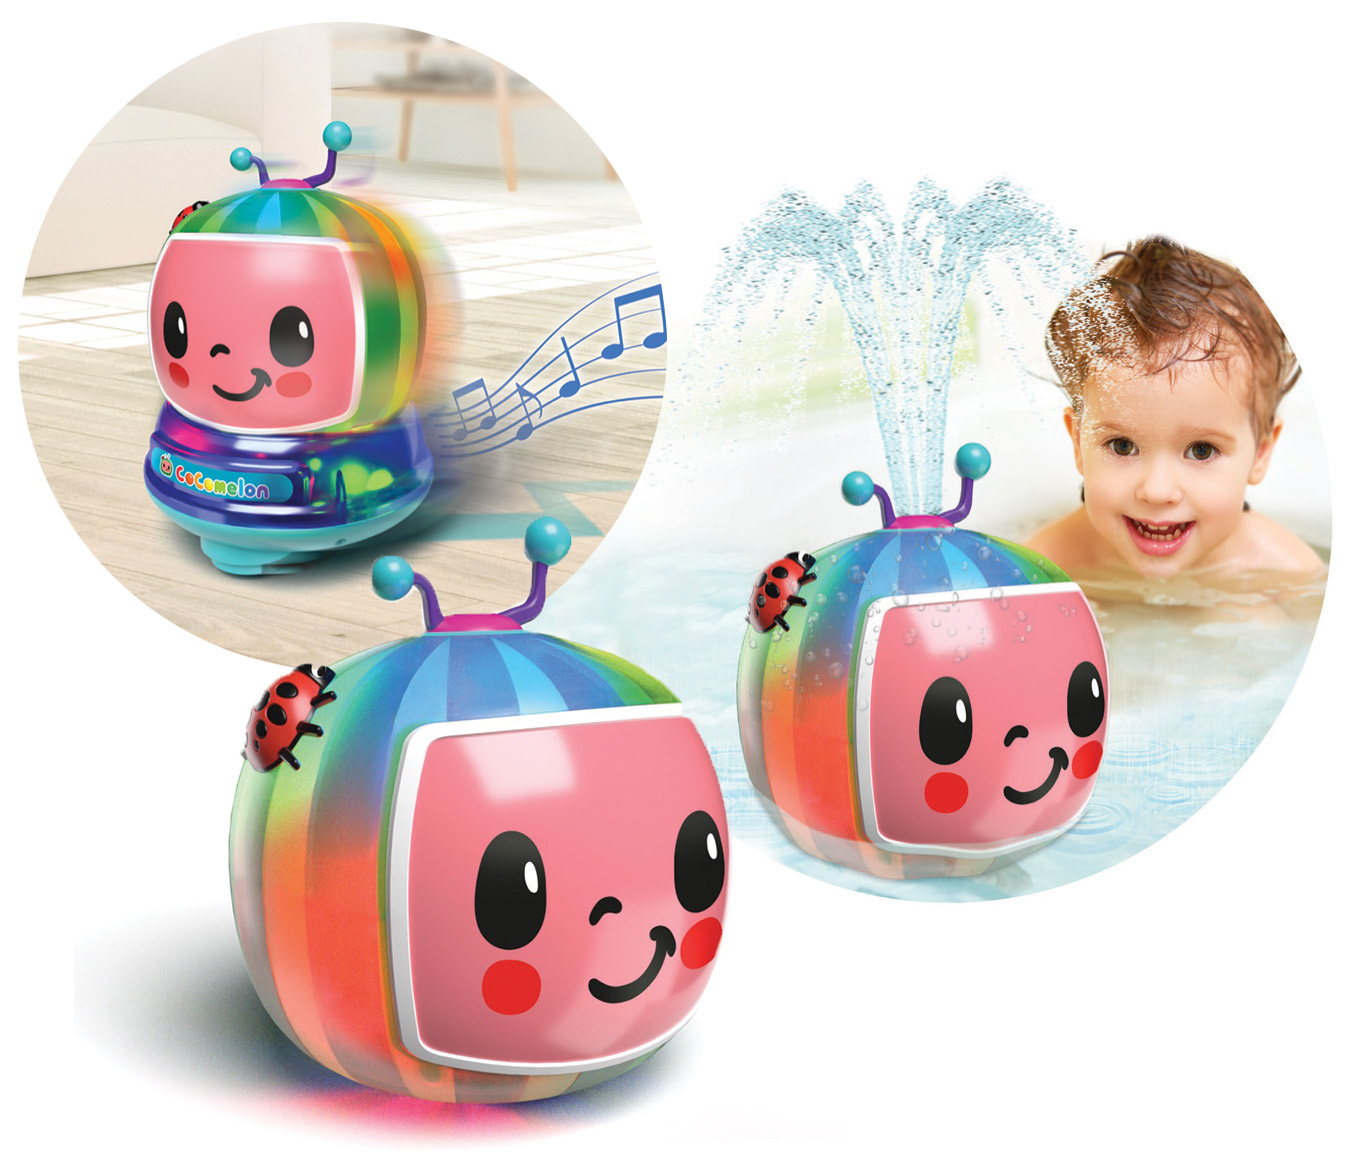 Spark Cocomelon 2-in-1 Spraying Bath Toy with LED Lights for Boys & Girls Ages 3 and up - image 1 of 7